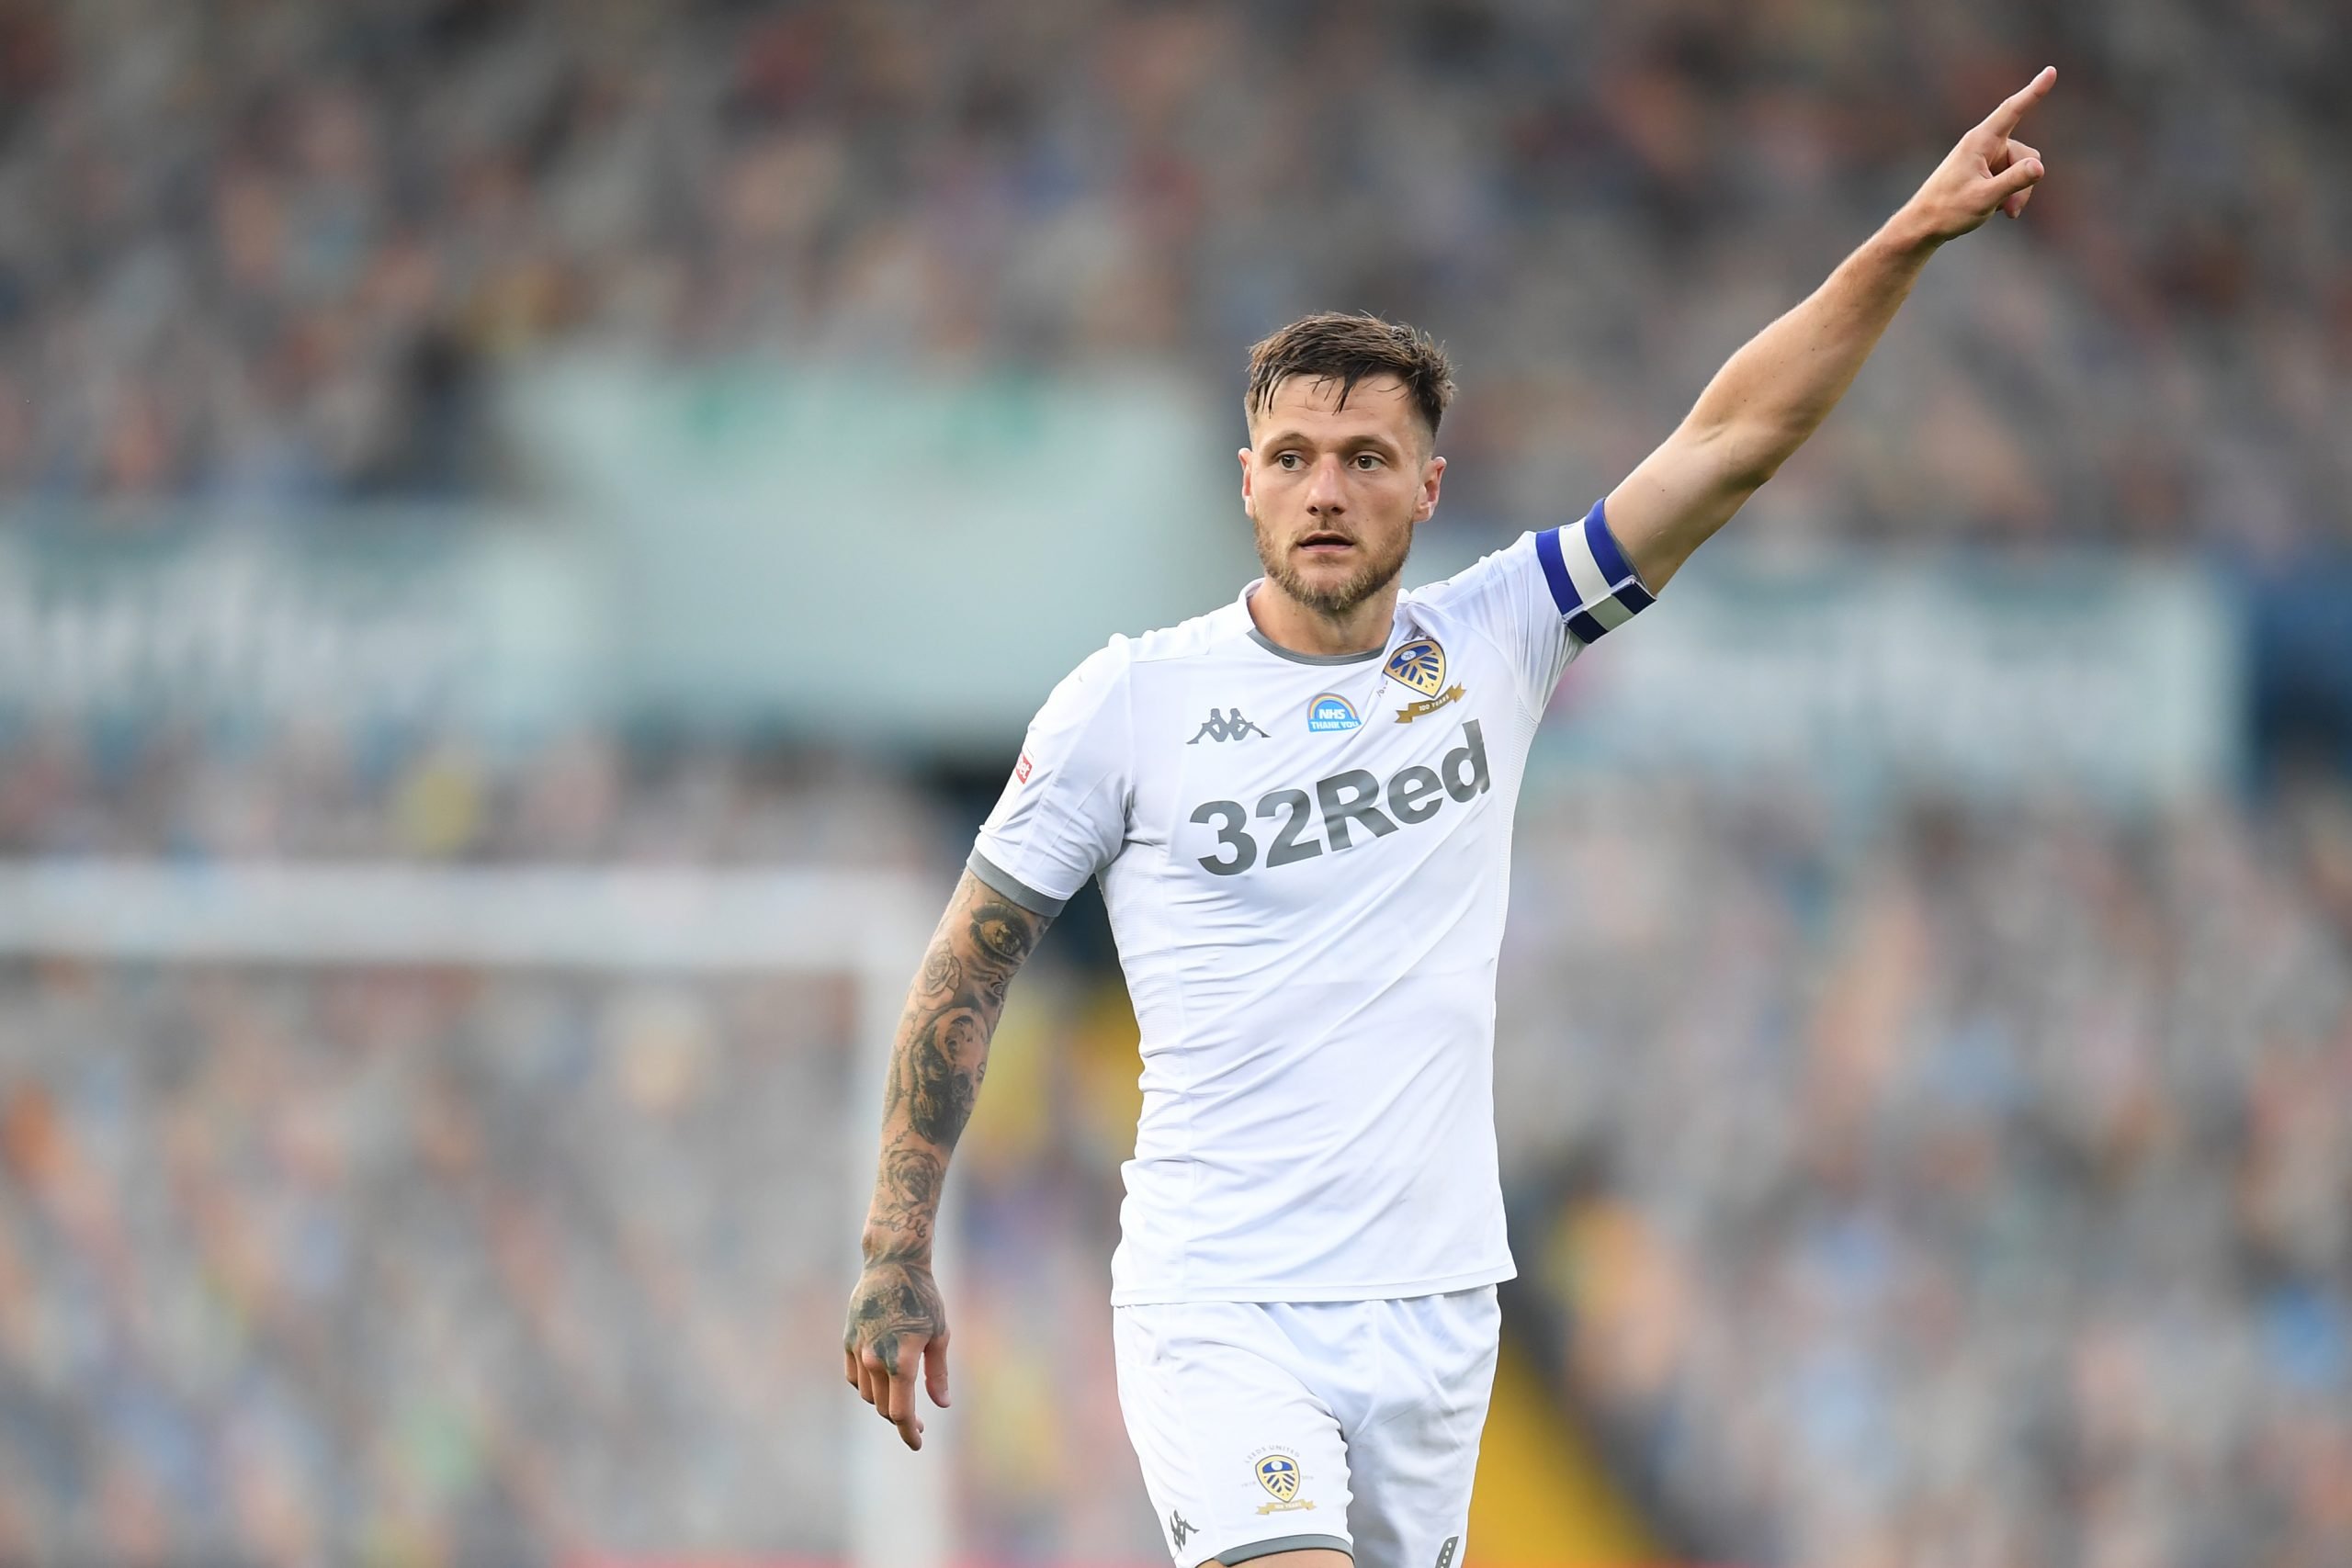 Leeds United captain Liam Cooper set to miss Burnley clash (Cooper is seen in the photo)